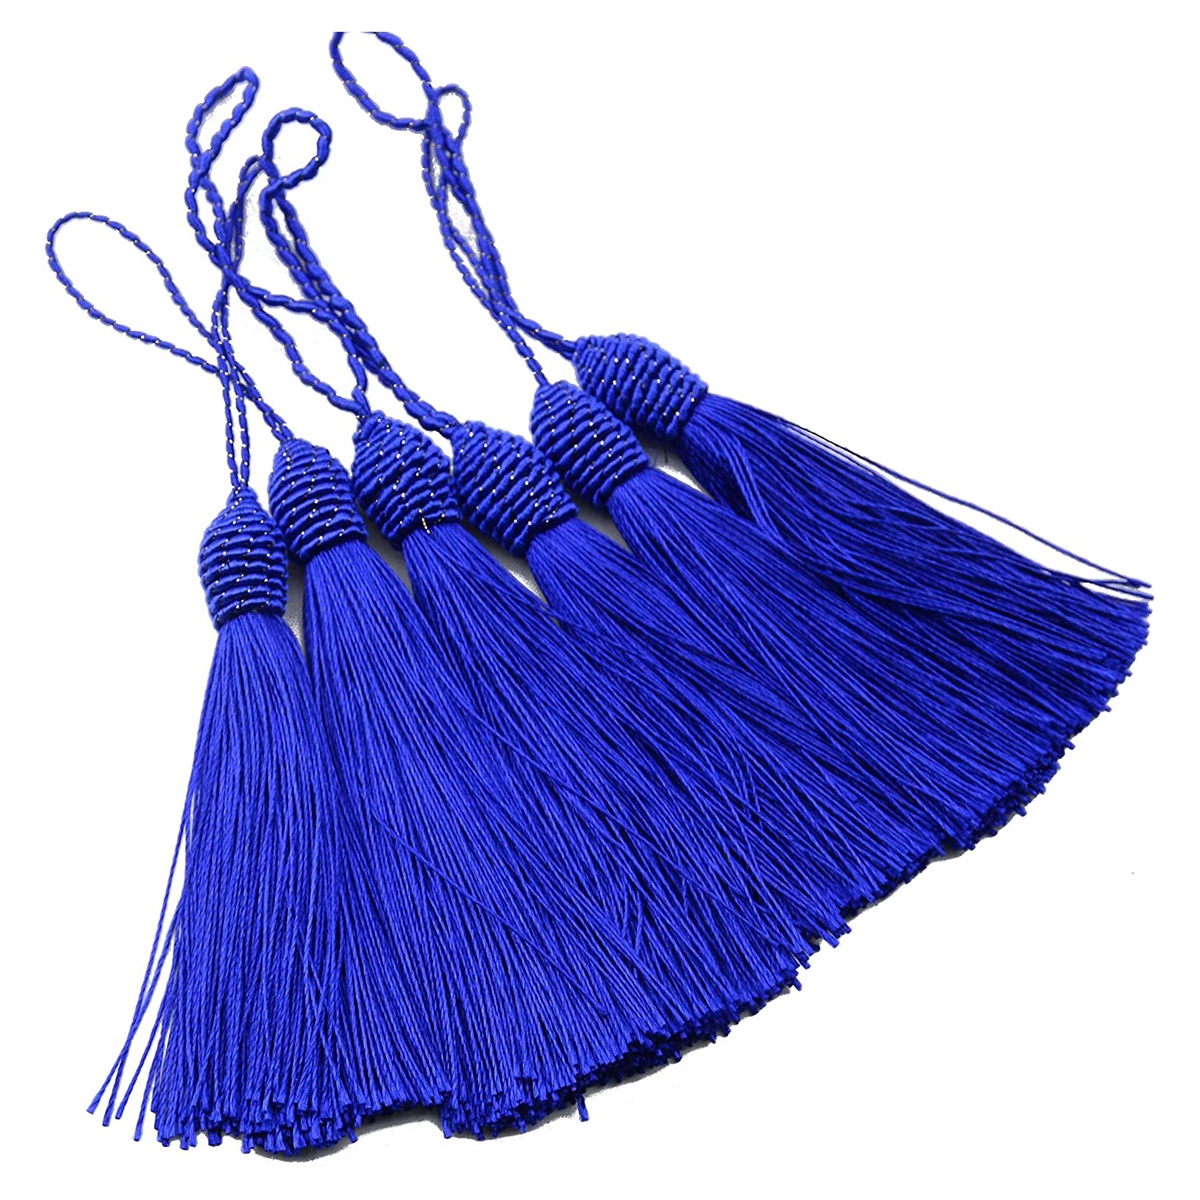 6 Inch Silky Floss Bookmark Tassels with 2-Inch Cord Loop and Small Craft Accessory (Navy Blue)